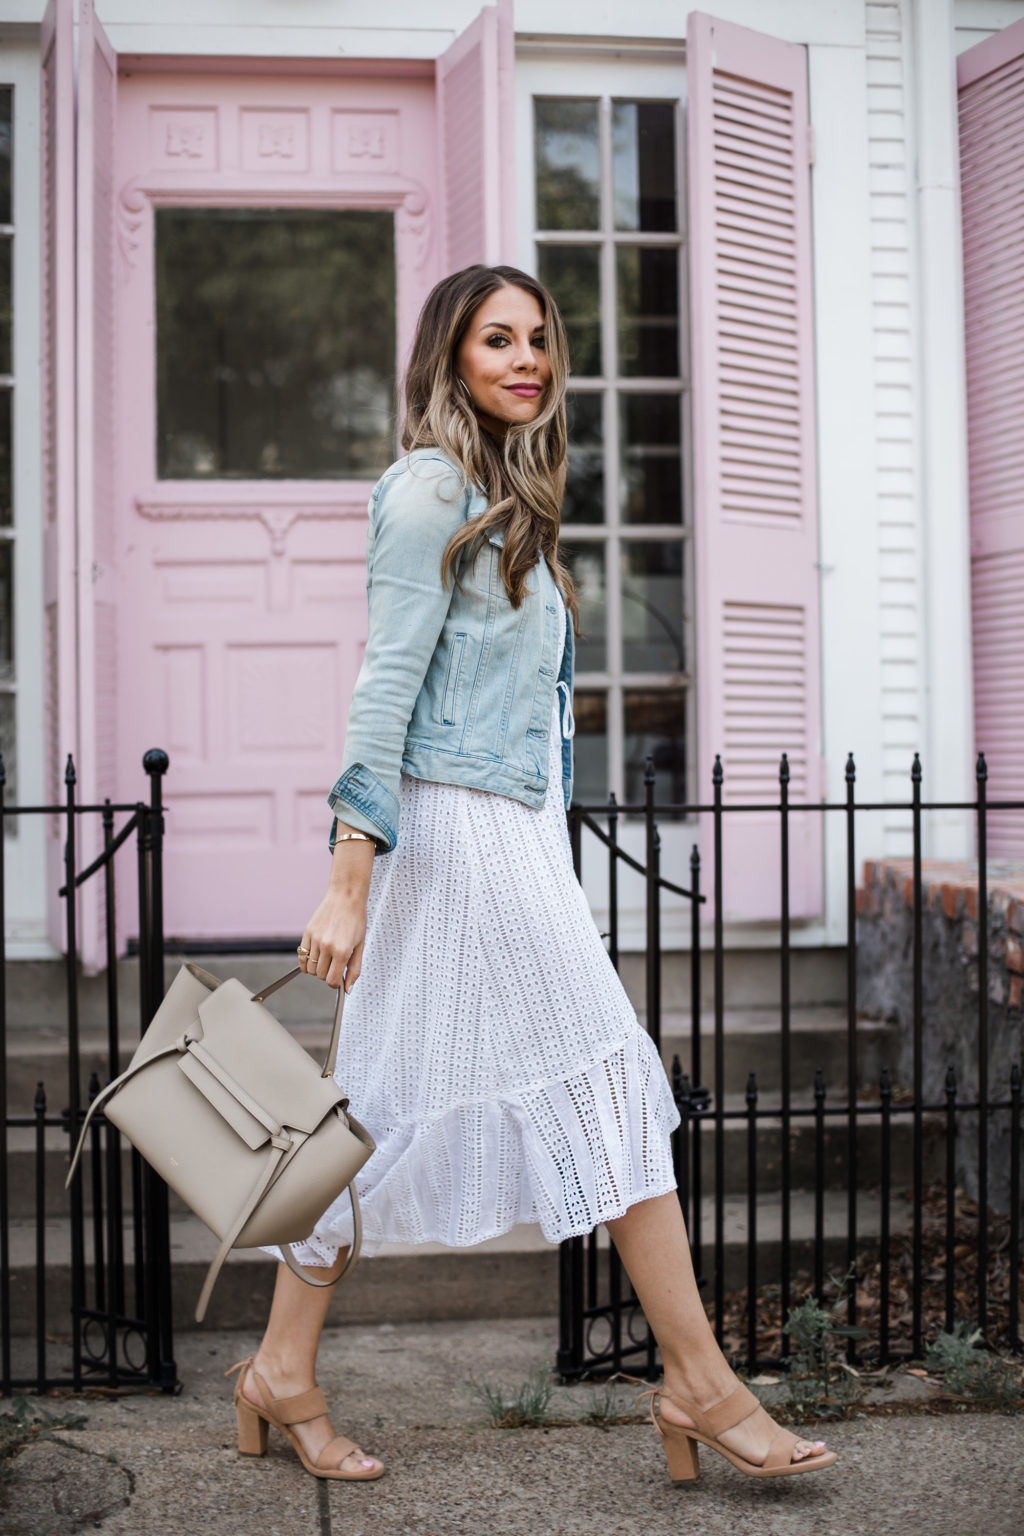 My Favorite Spring Combo: A White Eyelet Dress with Denim Jacket